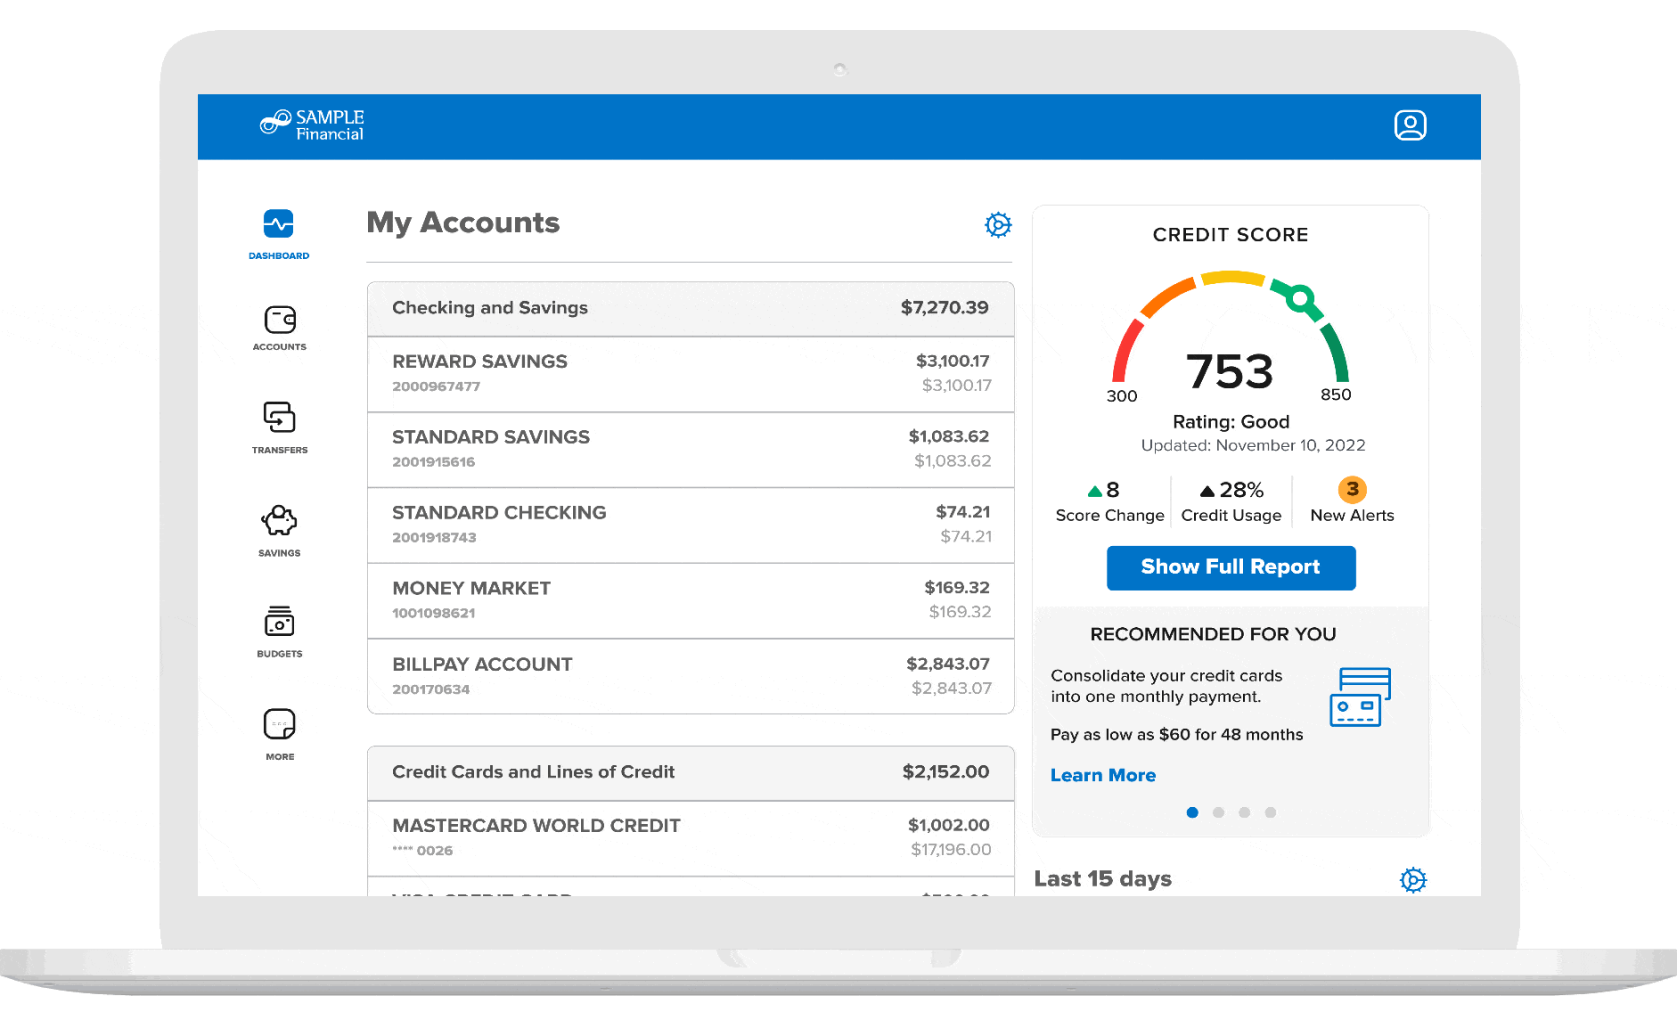 Credit Score Integrated in Digital Banking